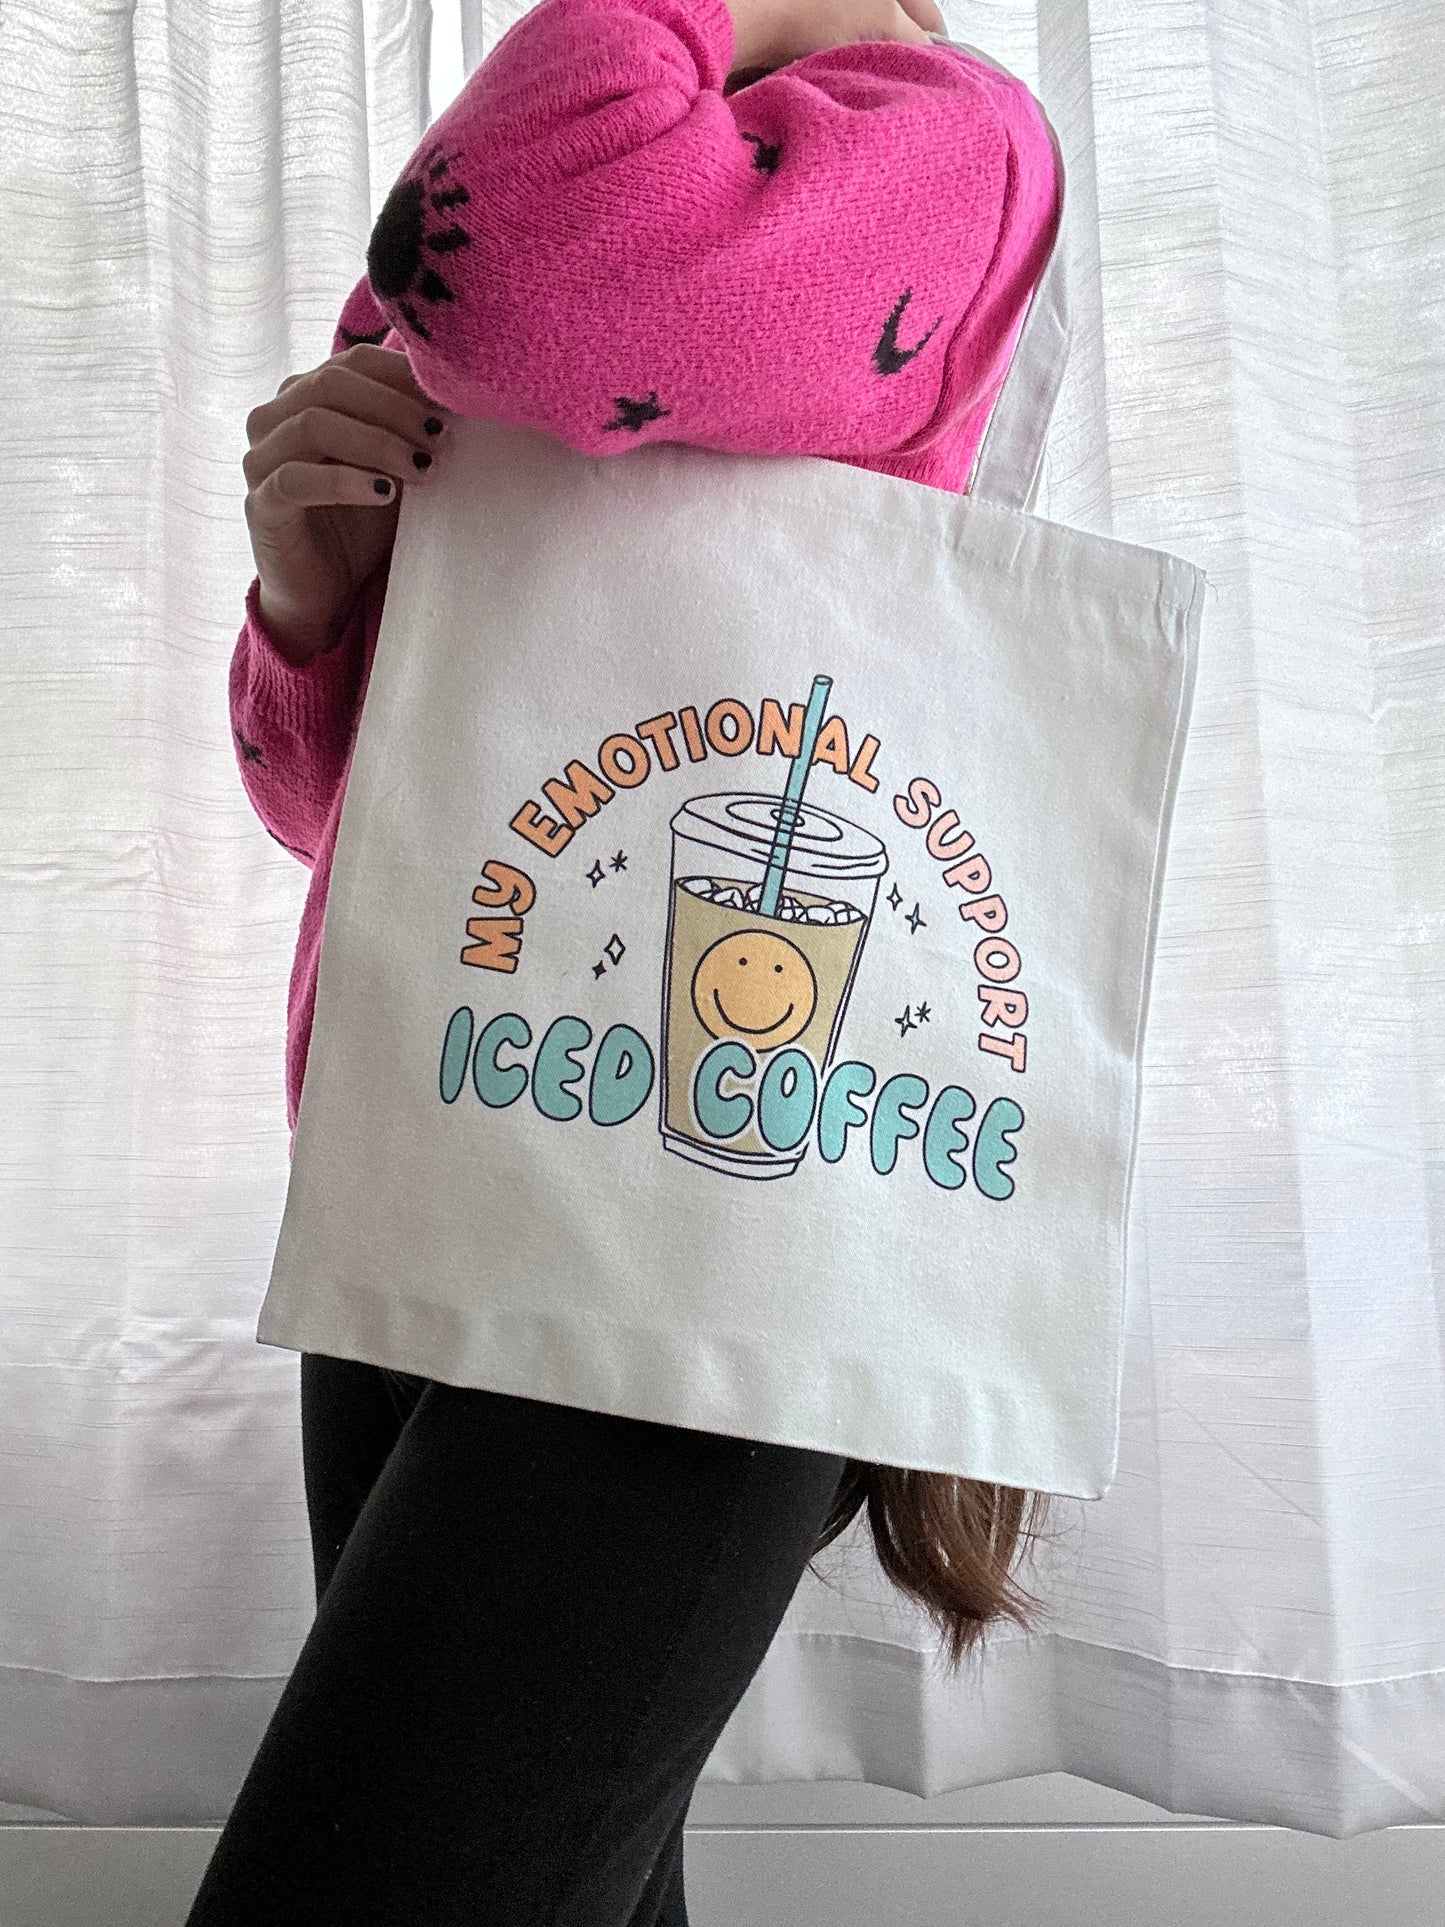 Emotional Support Iced Coffee Canvas Tote Bag